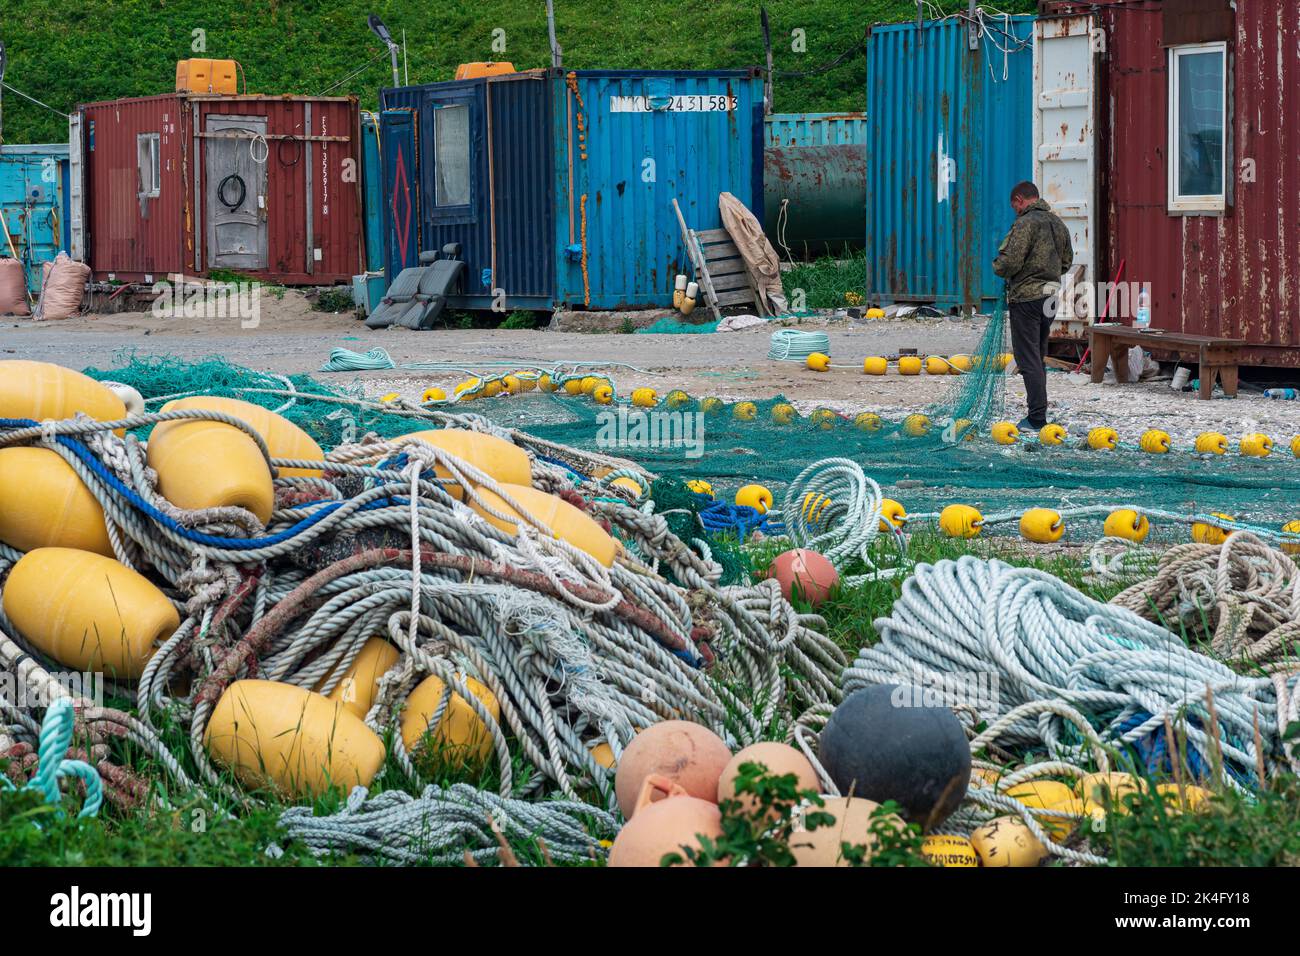 Lagunnoe, Russia - August 01, 2022: fisherman checks and repairs industrial fishing nets on the shore at a fishing base Stock Photo